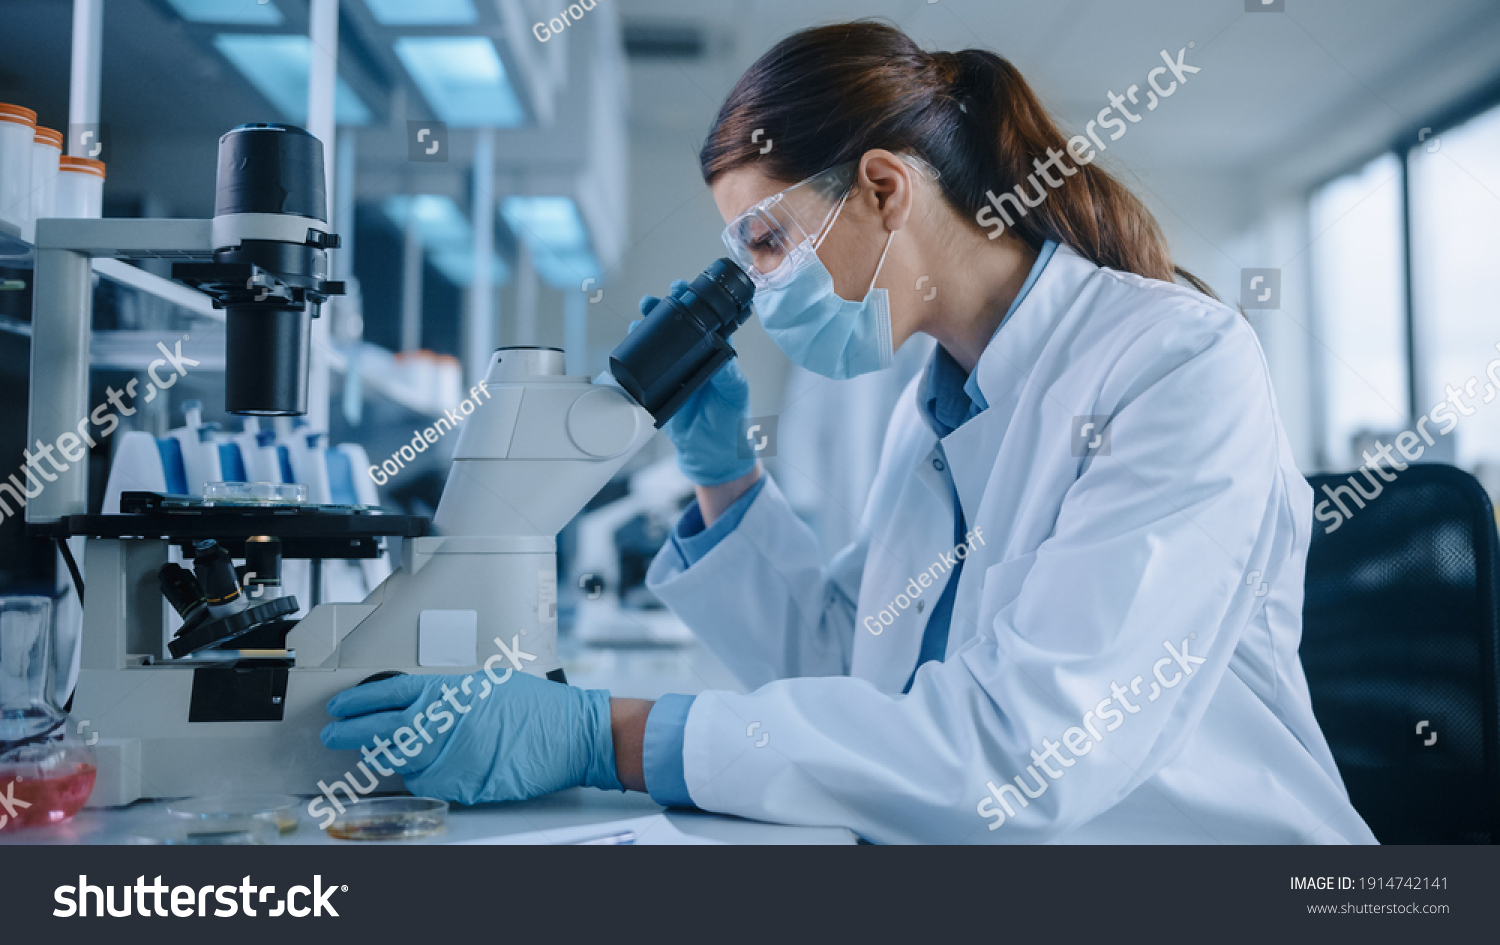 Female Scientist in Face Mask and Glasses Looking a Petri Dish with Genetically Modified Sample Chemicals Under a Microscope. Microbiologist Working in Modern Laboratory with Technological Equipment. #1914742141